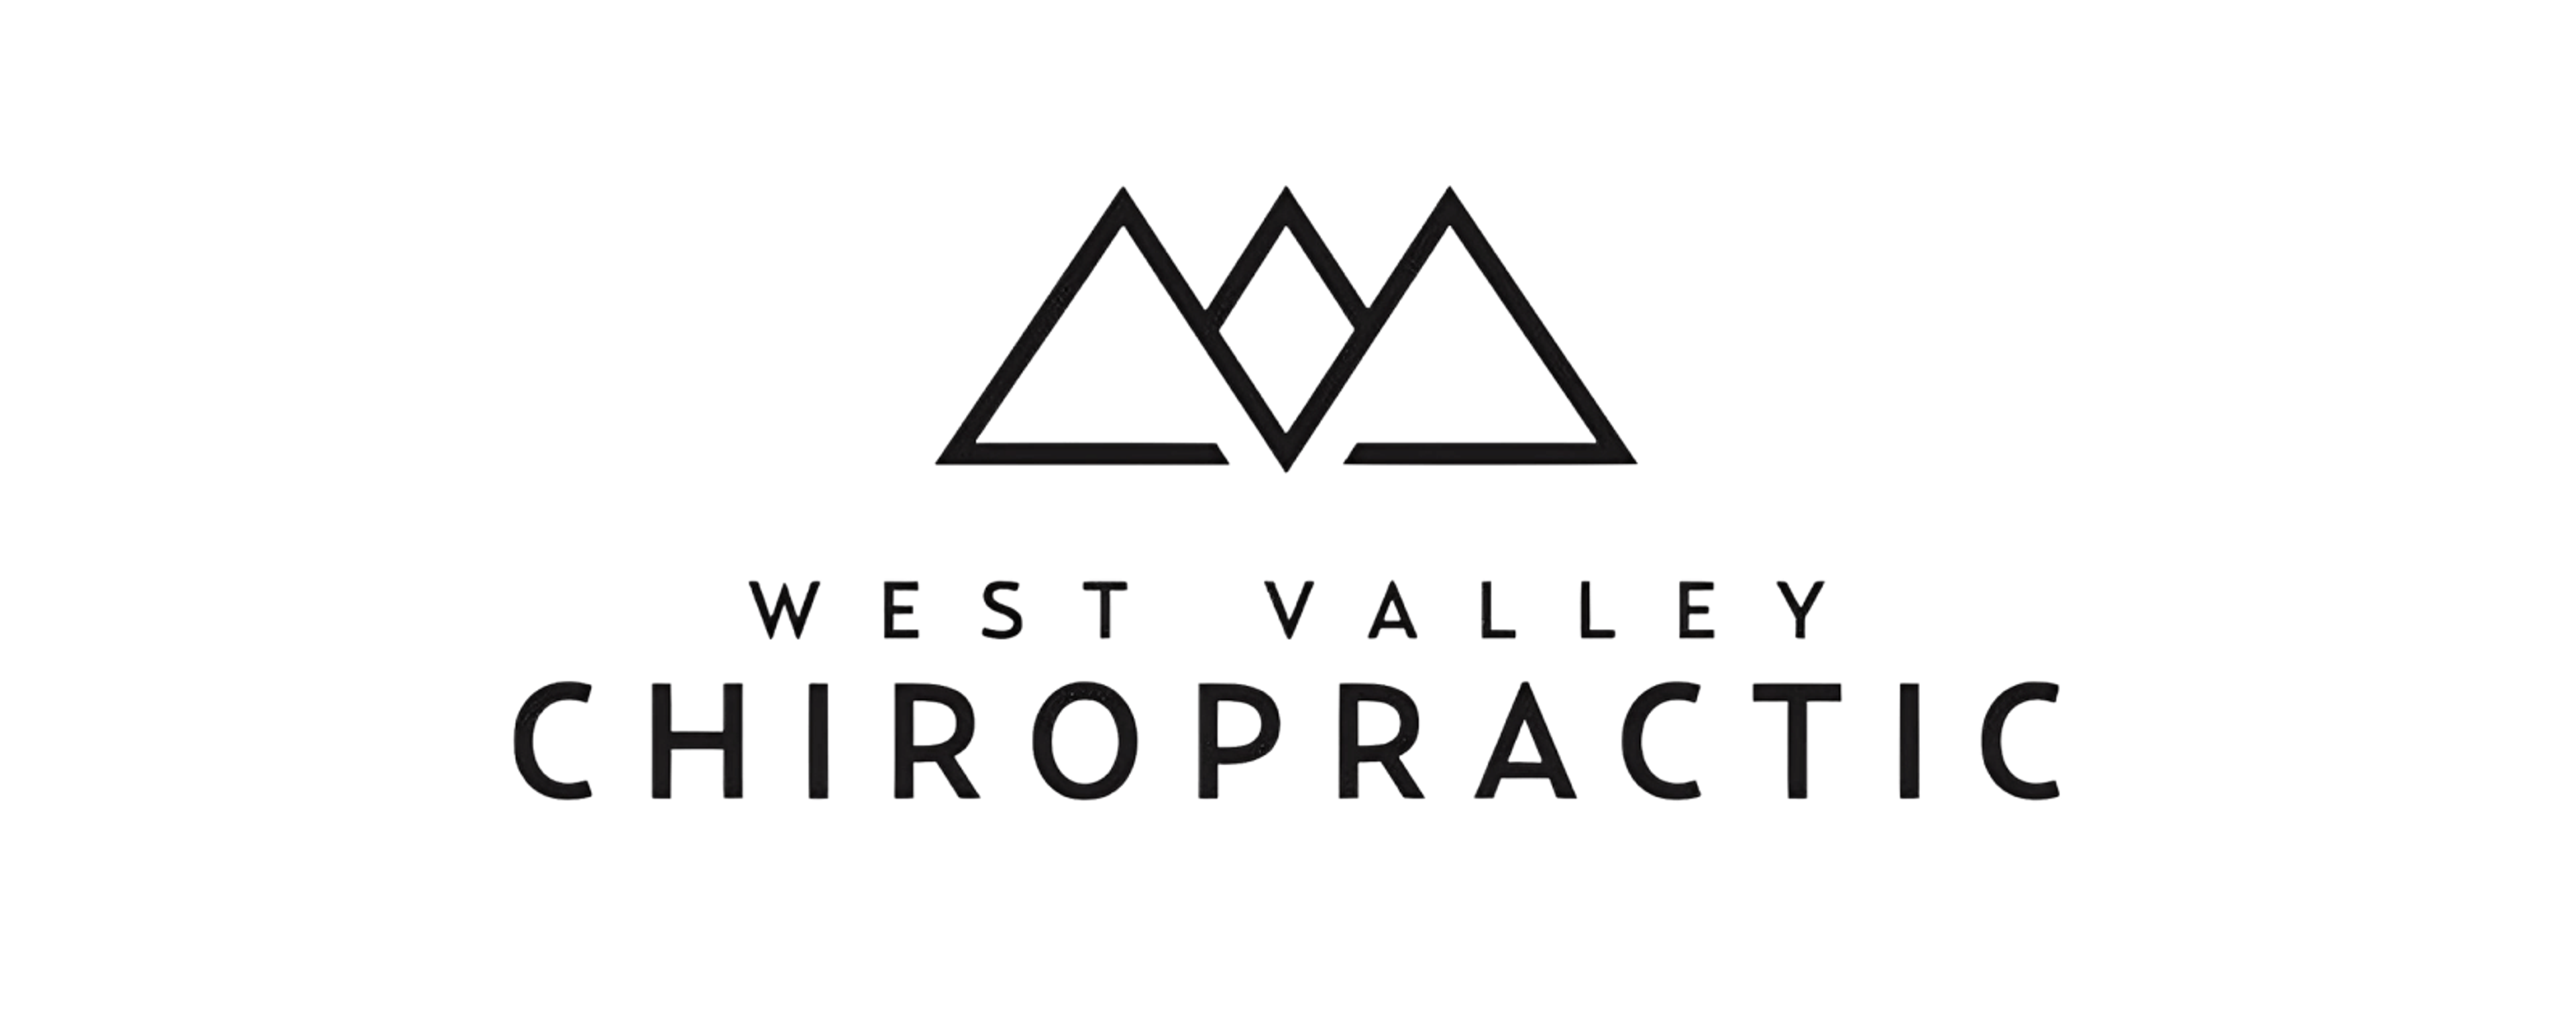 West Valley Chiropractic logo on a padded white background